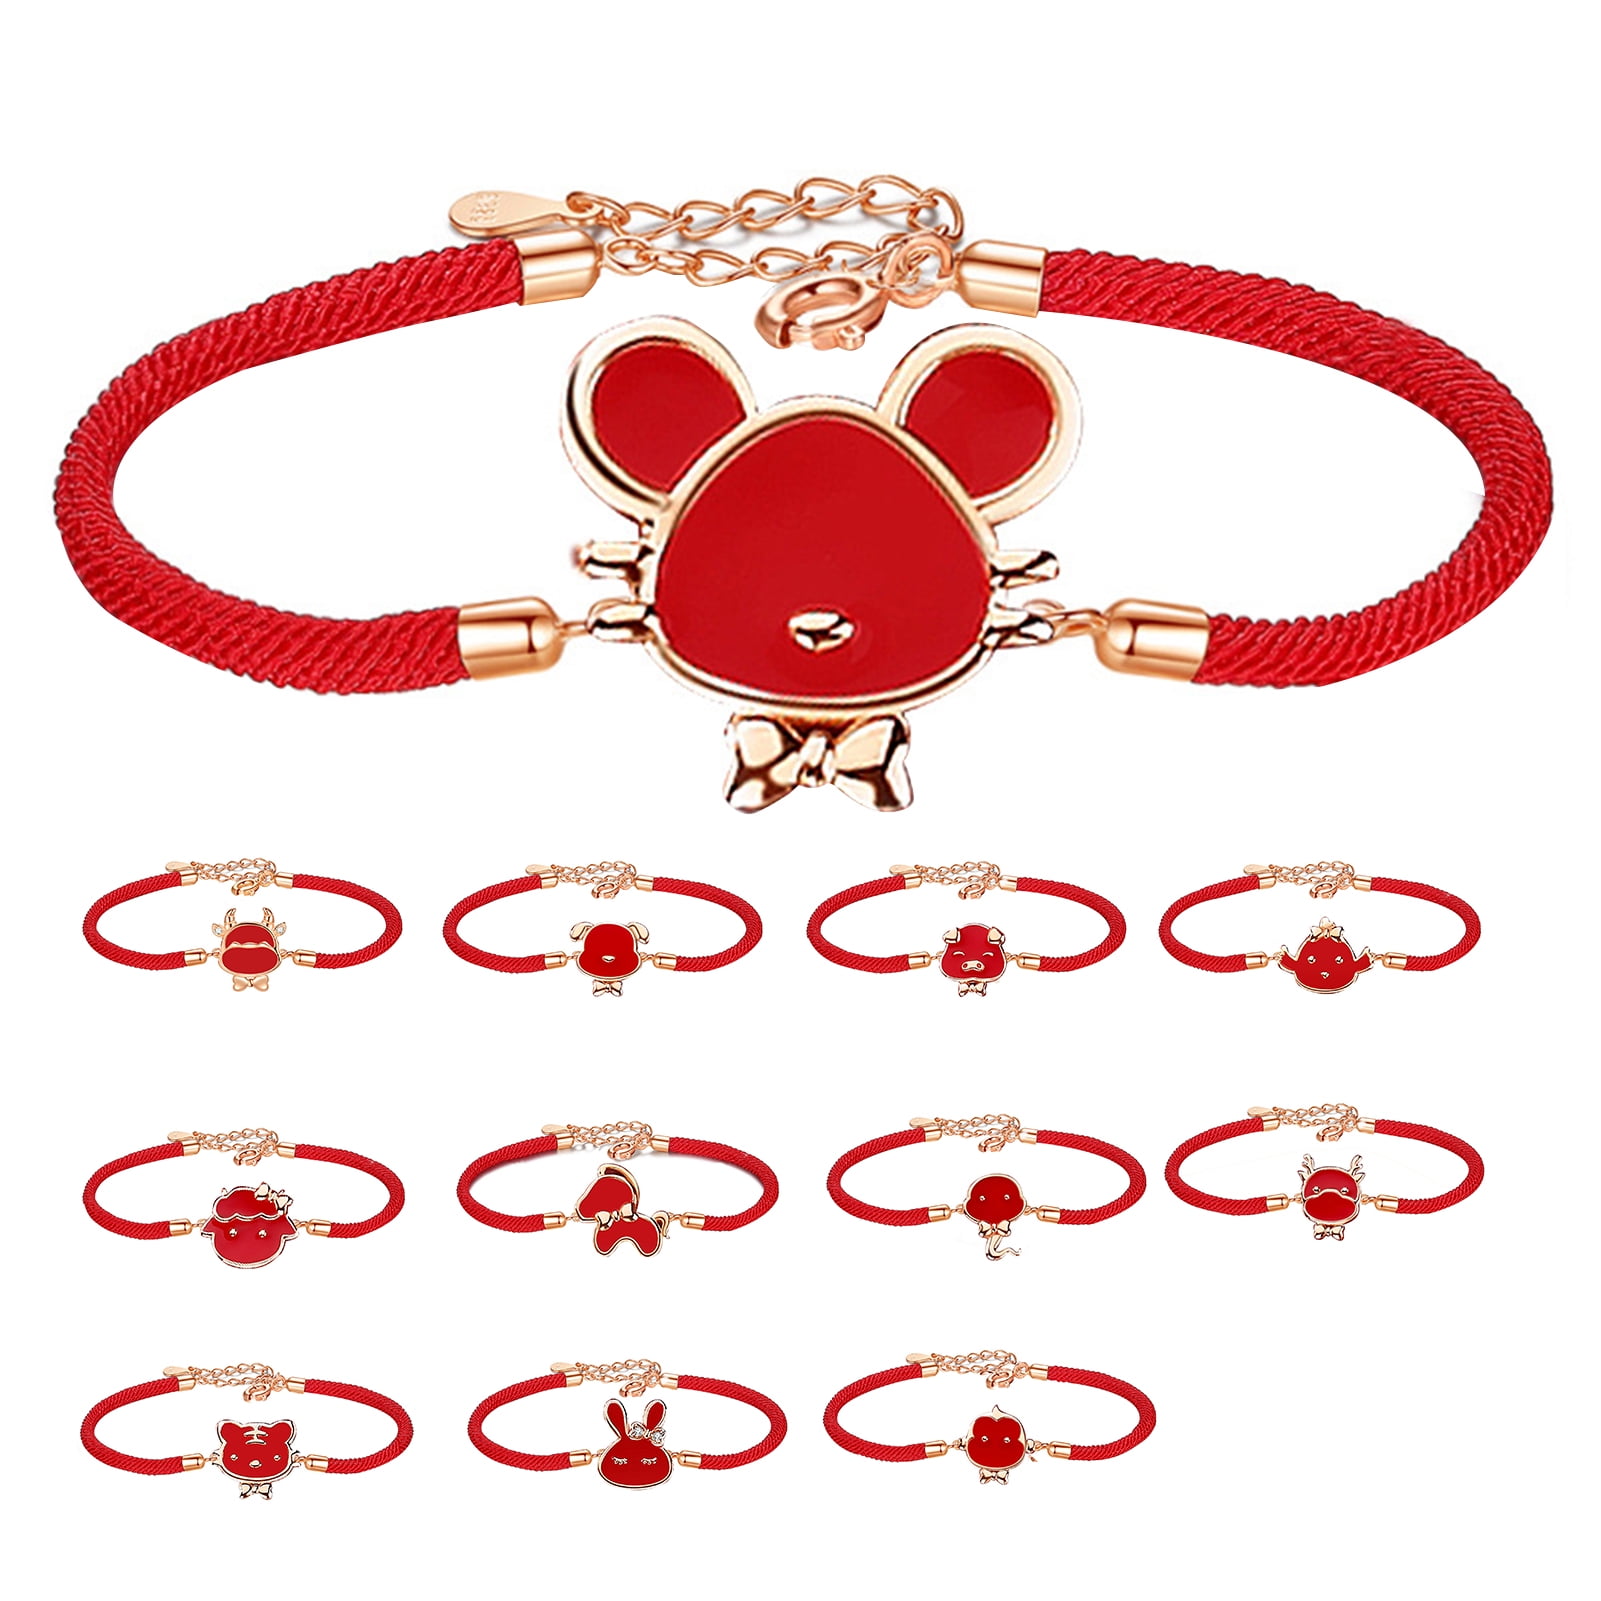 Chinese red rope zodiac gifts Lucky child bracelet Handmade 